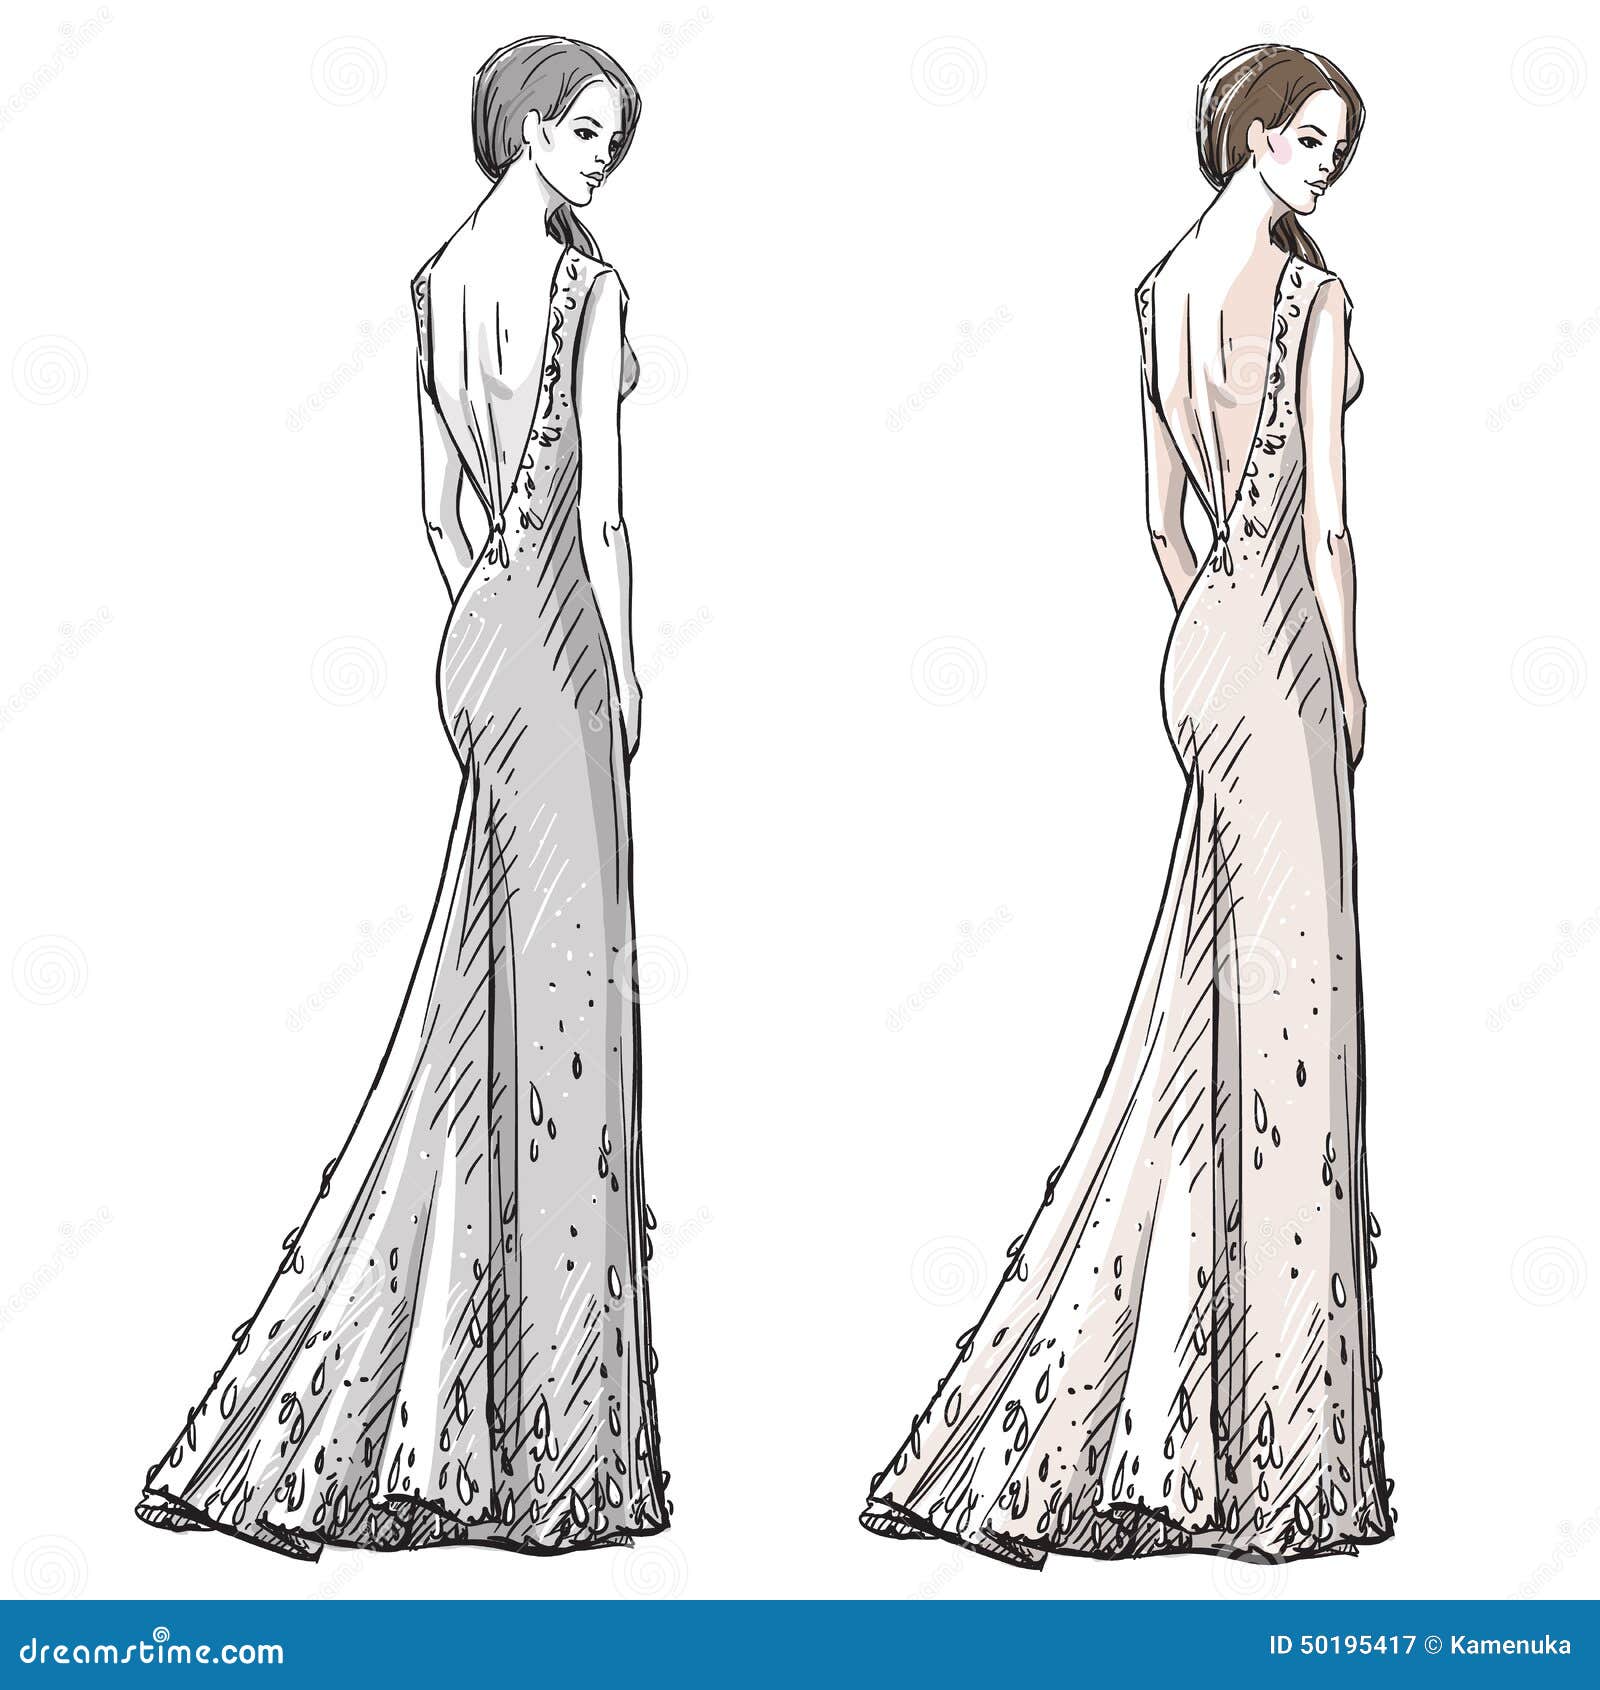 Best Prom Dress Trends 2020 | How to draw a girl in a prom dress - YouTube